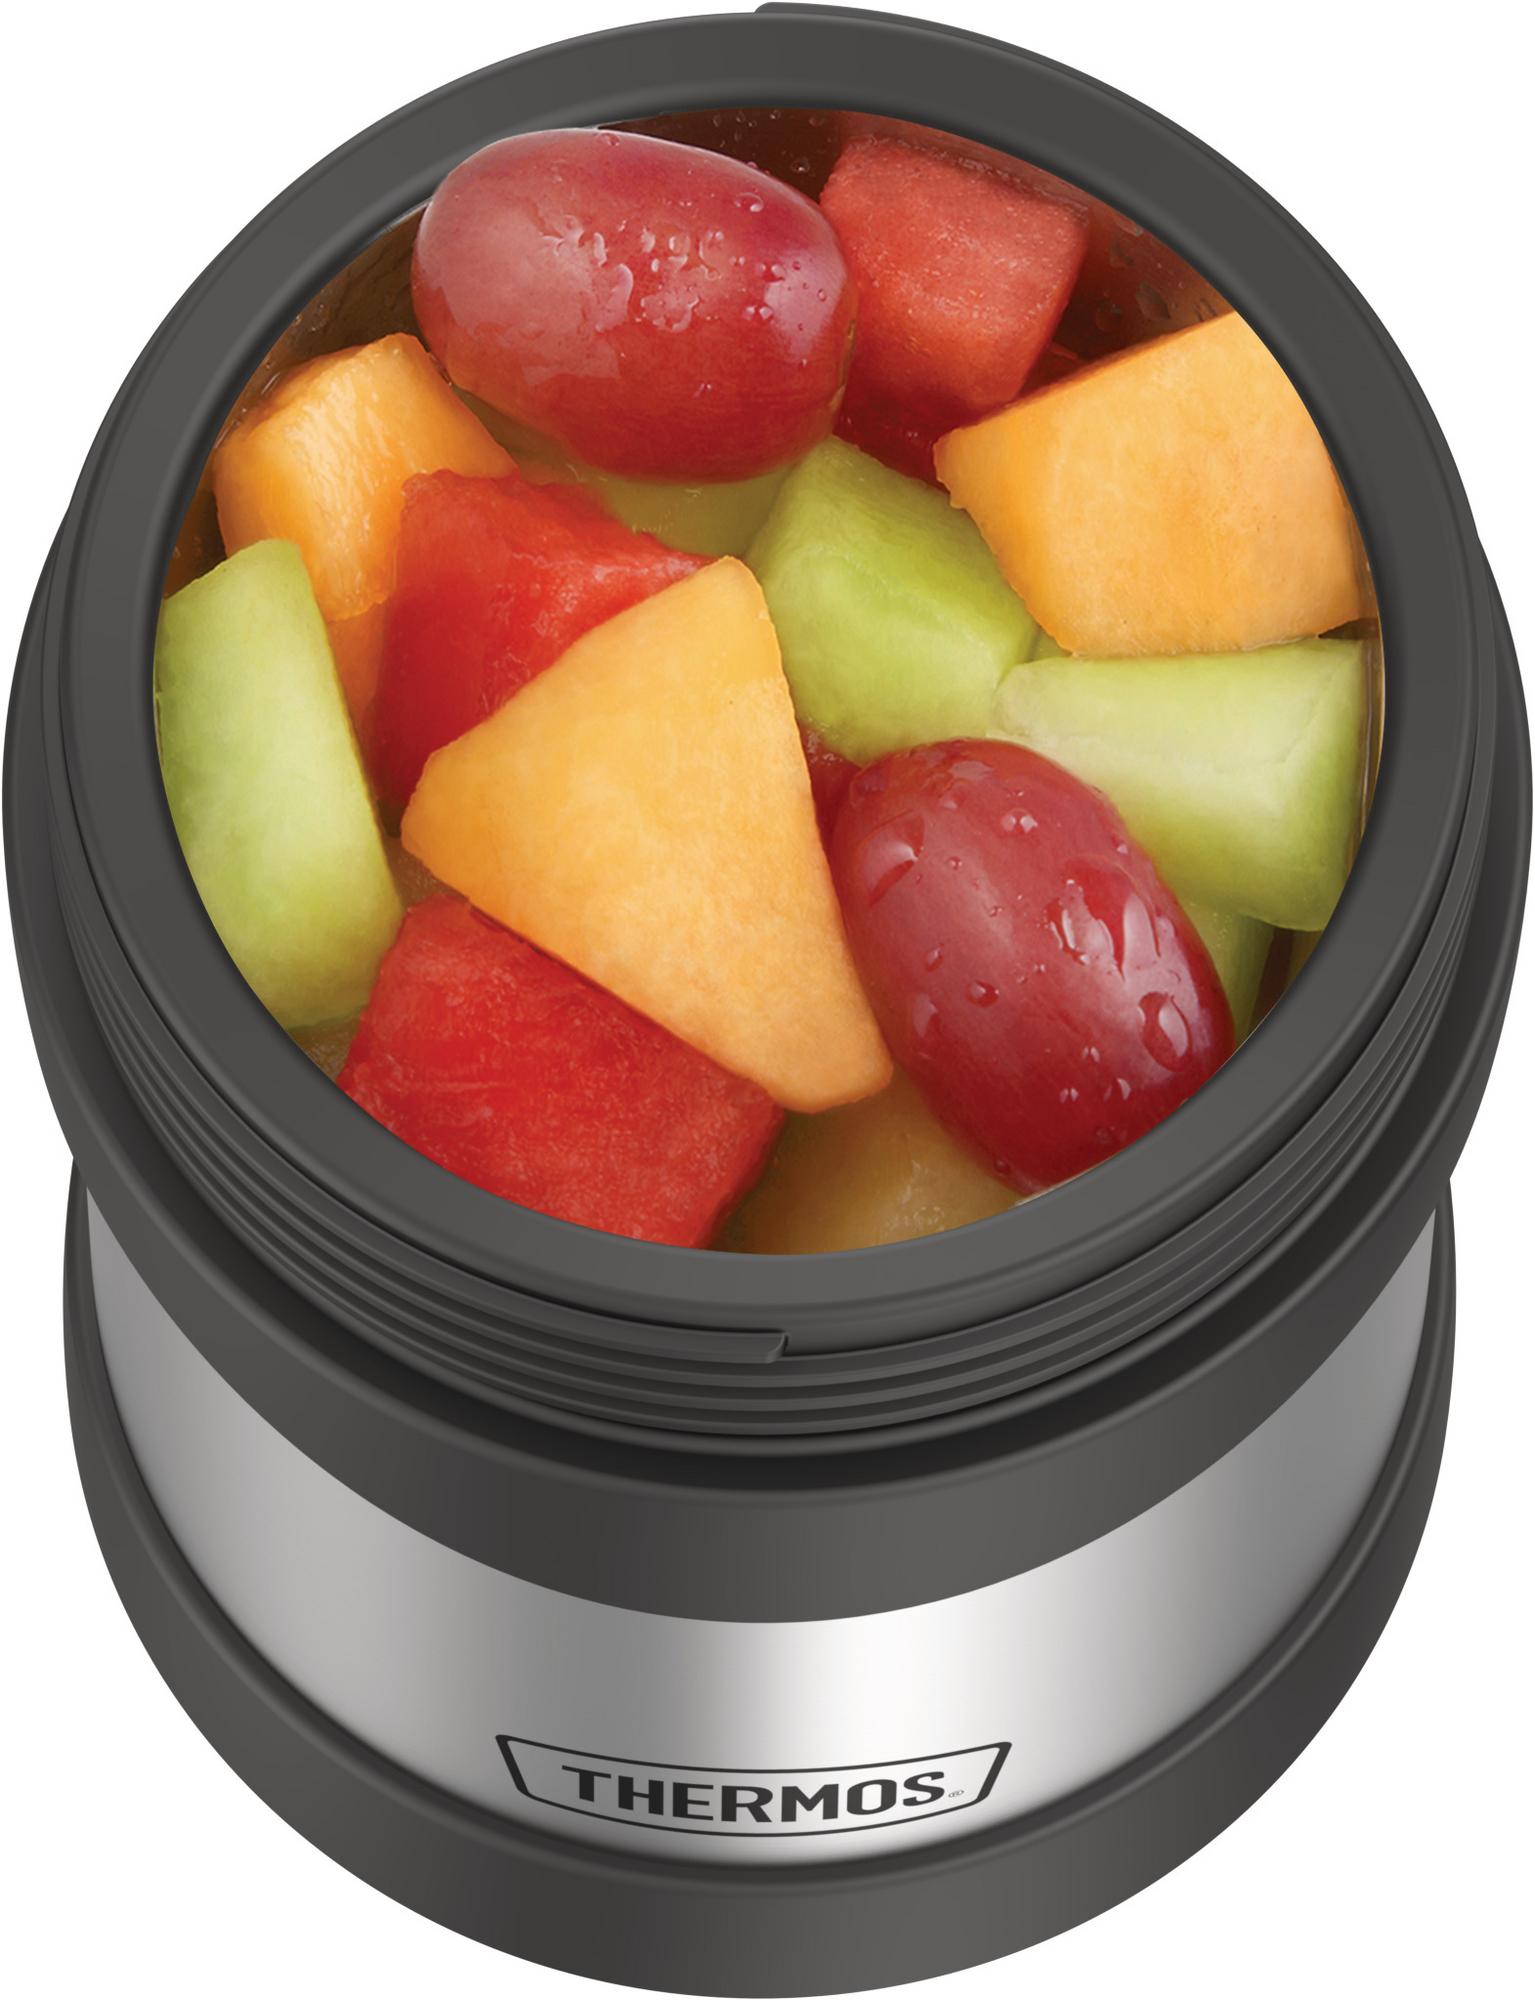 Thermos 10 Oz Vacuum Insulated Food Jar, Stainless Steel - image 5 of 5